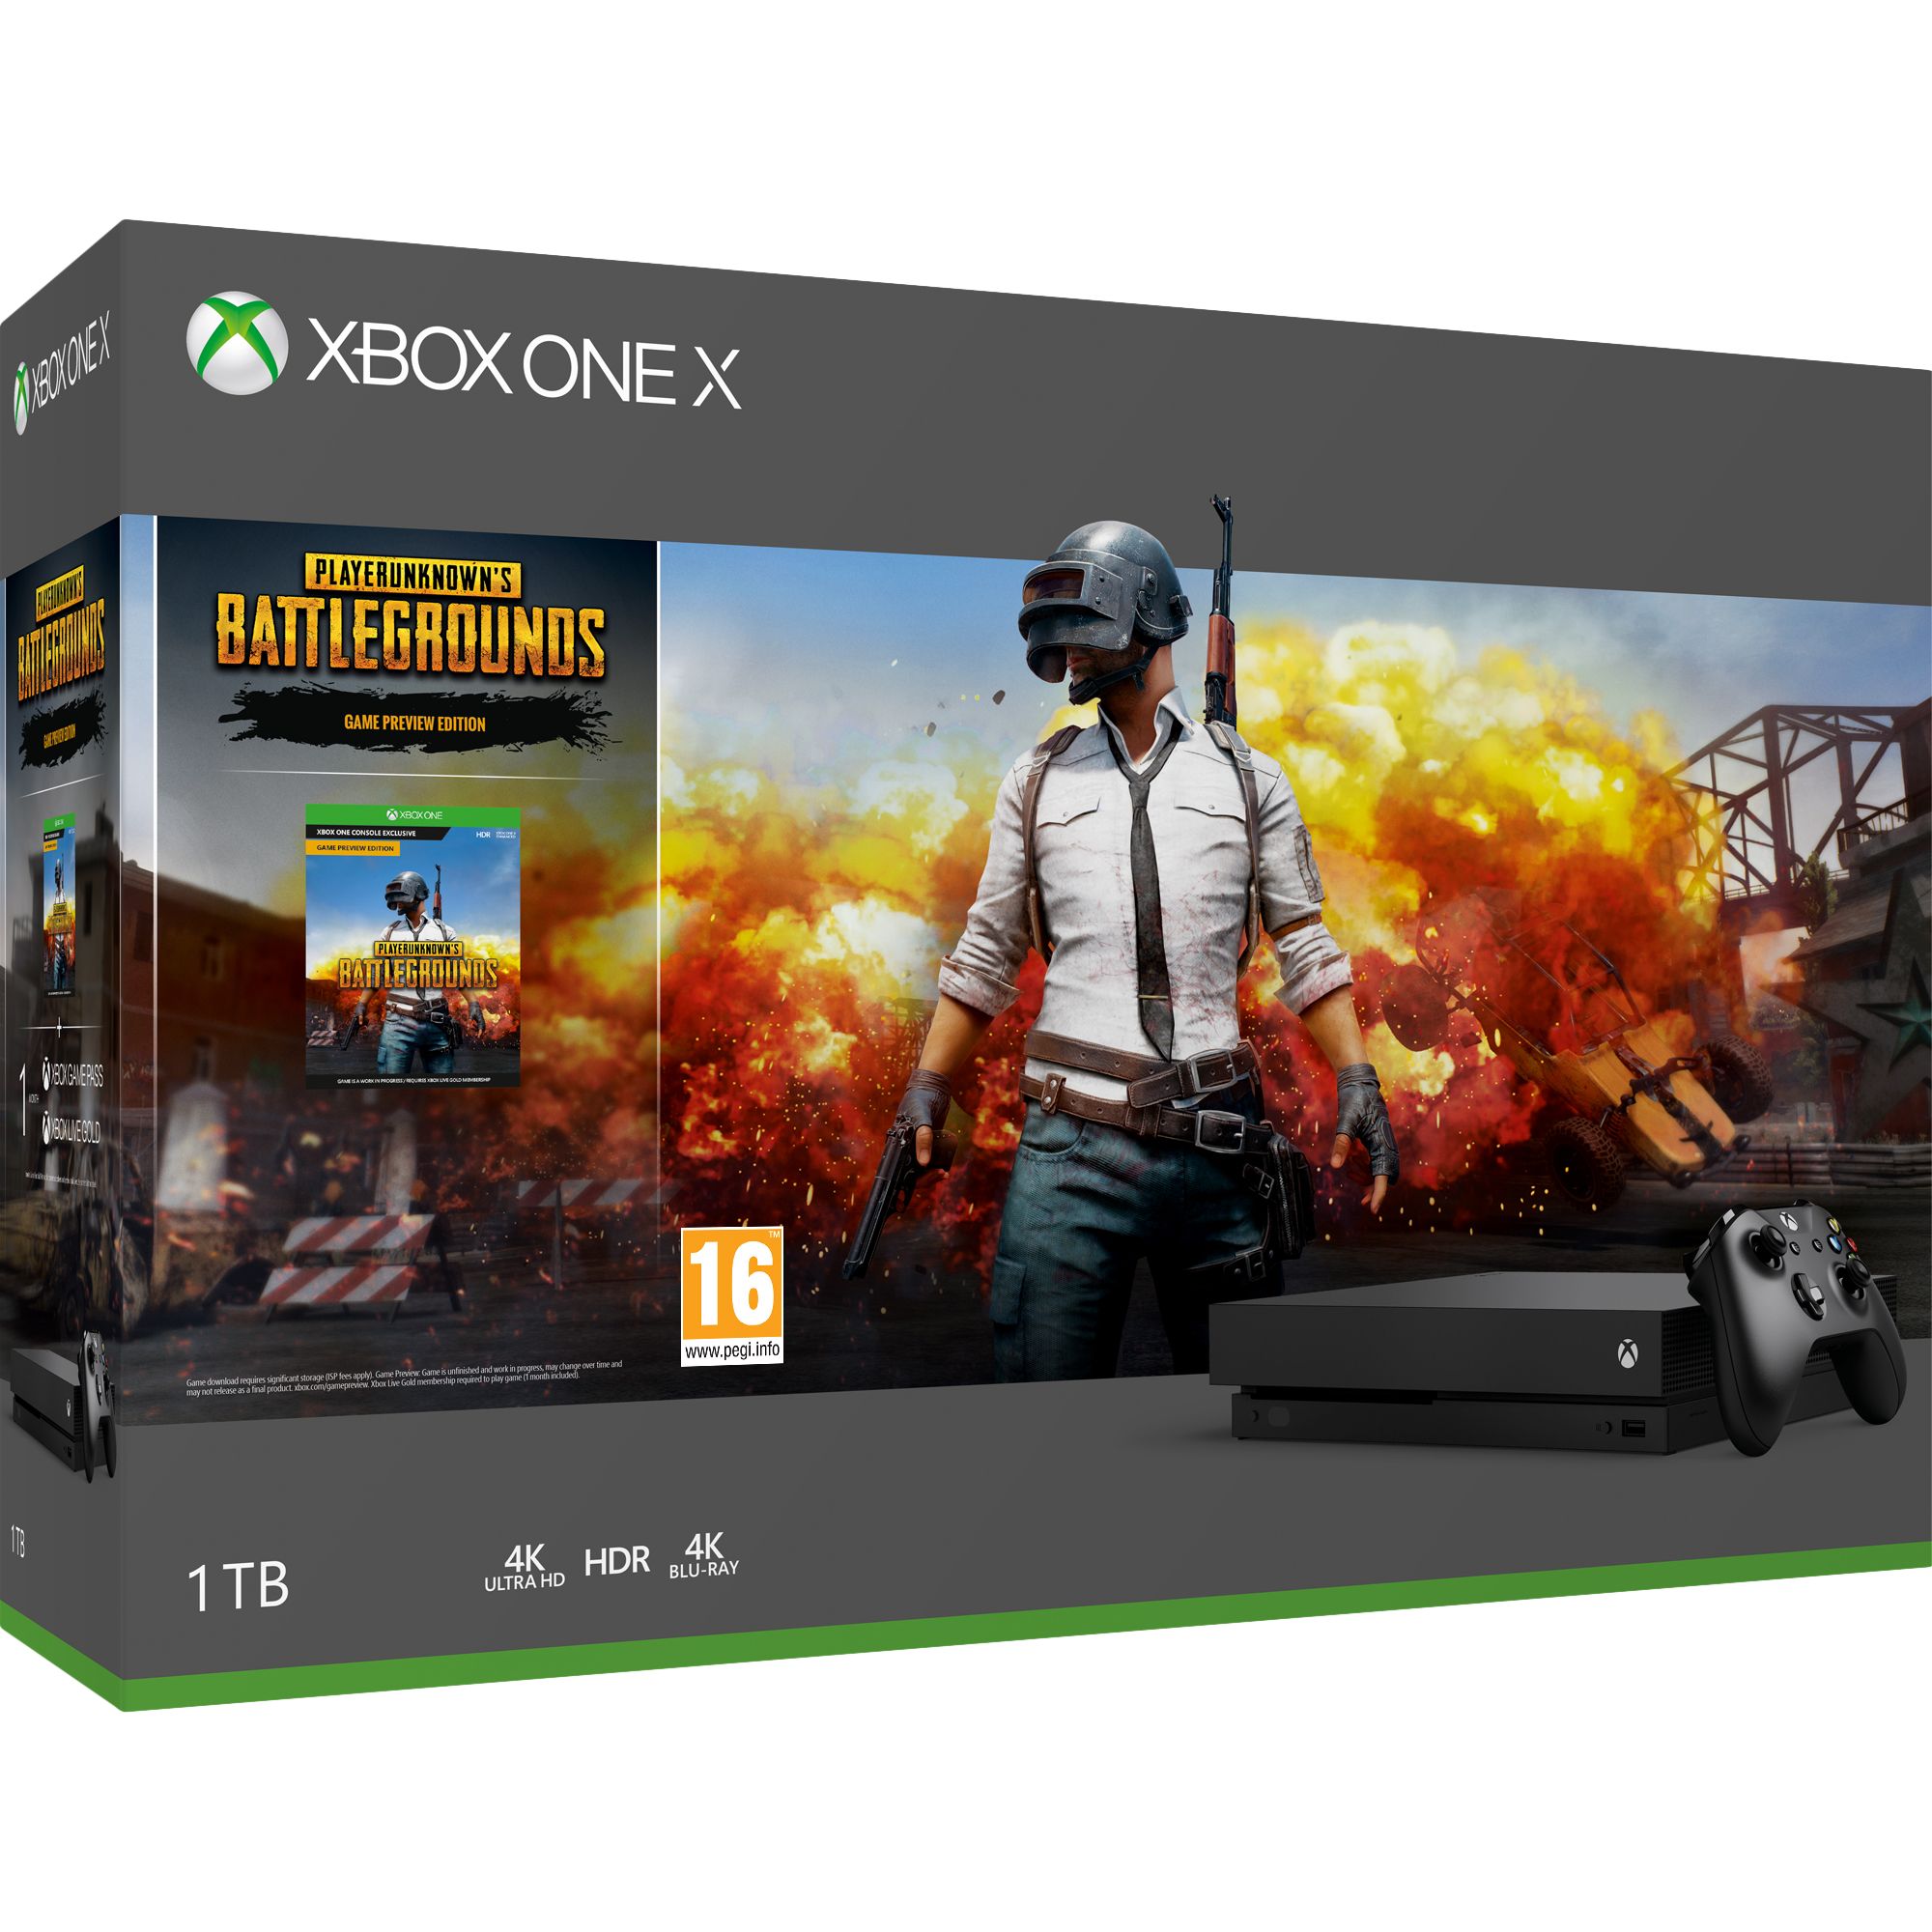 Microsoft Xbox One X Console, 1TB, with Wireless Controller, Black and PlayerUnknown’s Battlegrounds Game Bundle